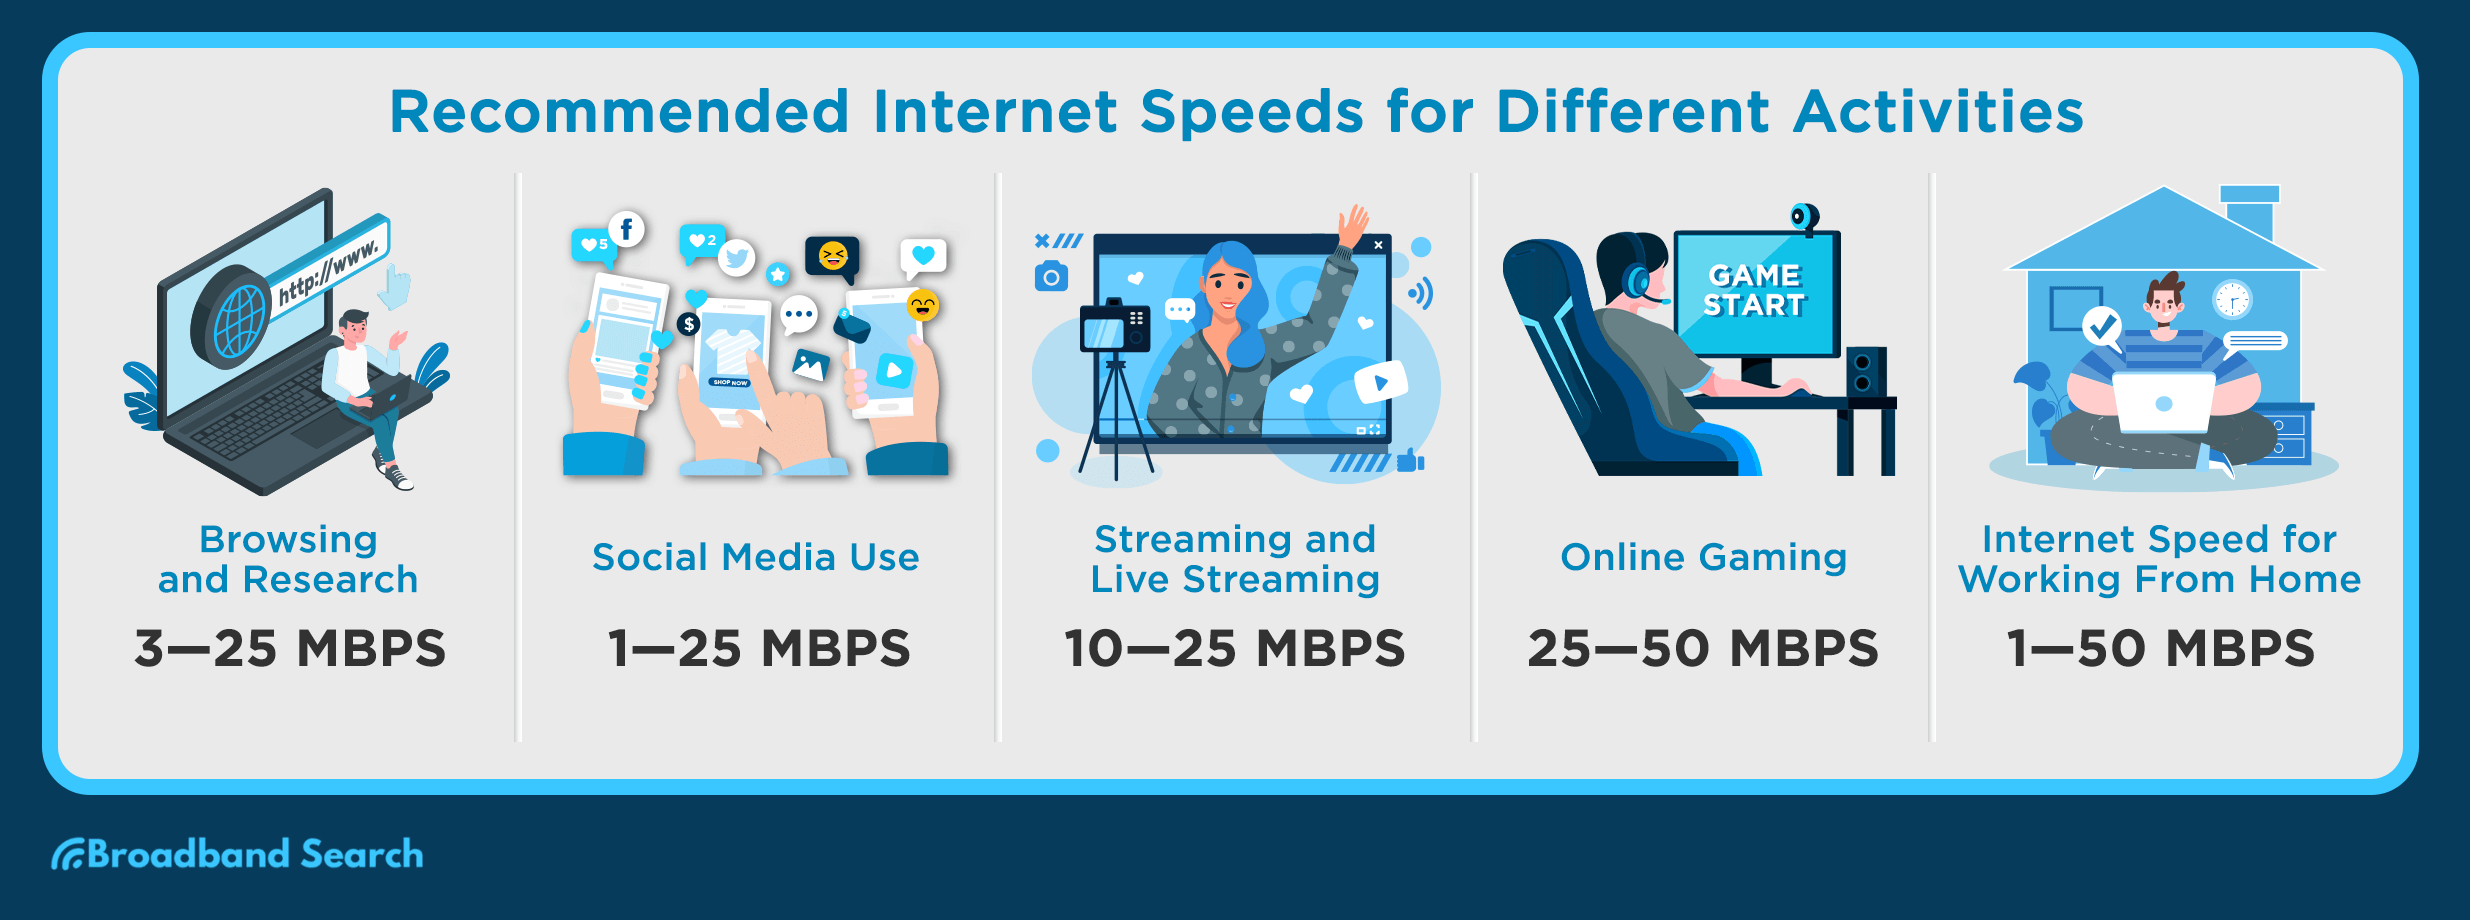 Gaming Guide: What Internet Speed Do I Need for Gaming? - BroadbandSearch